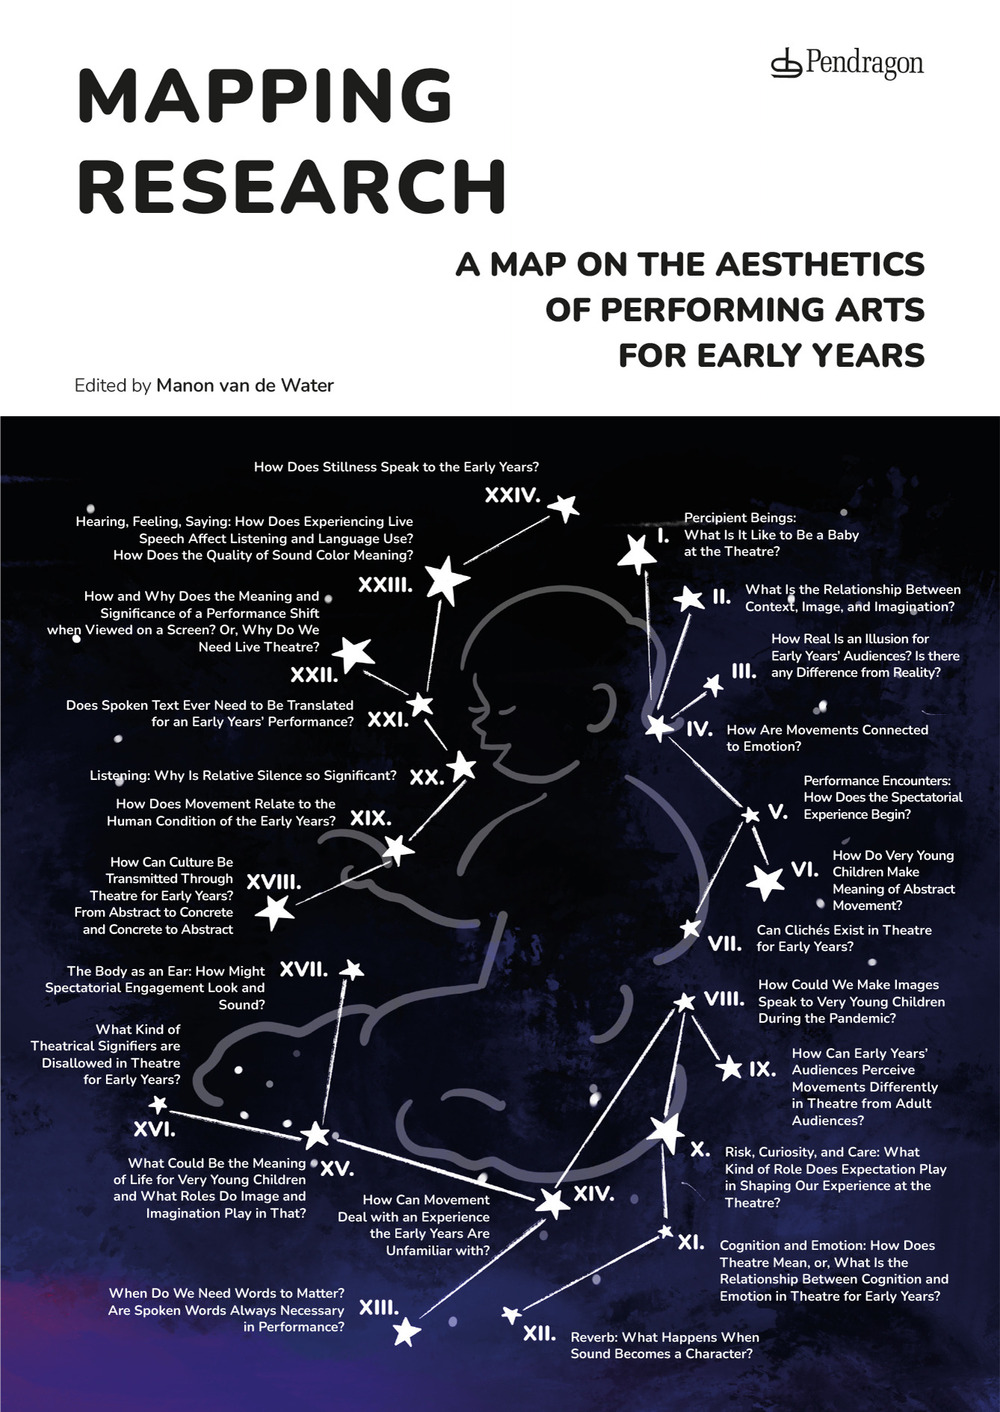 Mapping research. A map on the aestethics of performing arts for early year